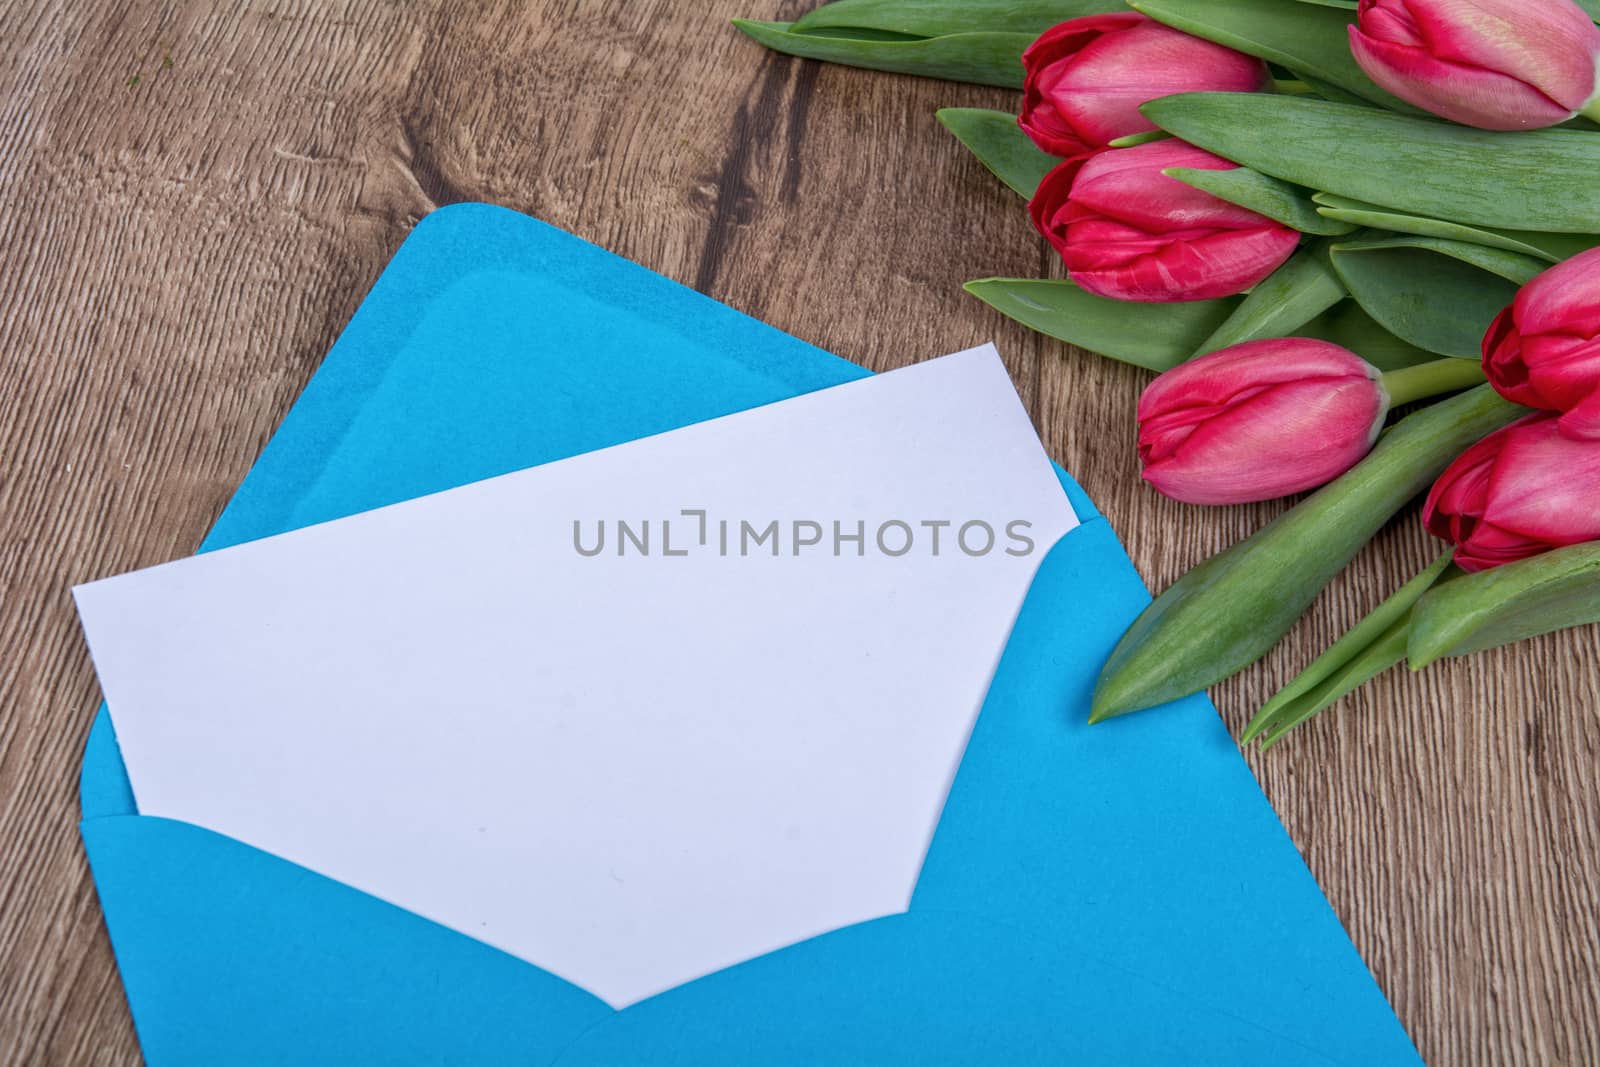 Envelope with sheet of paper and red tulips on a wooden background